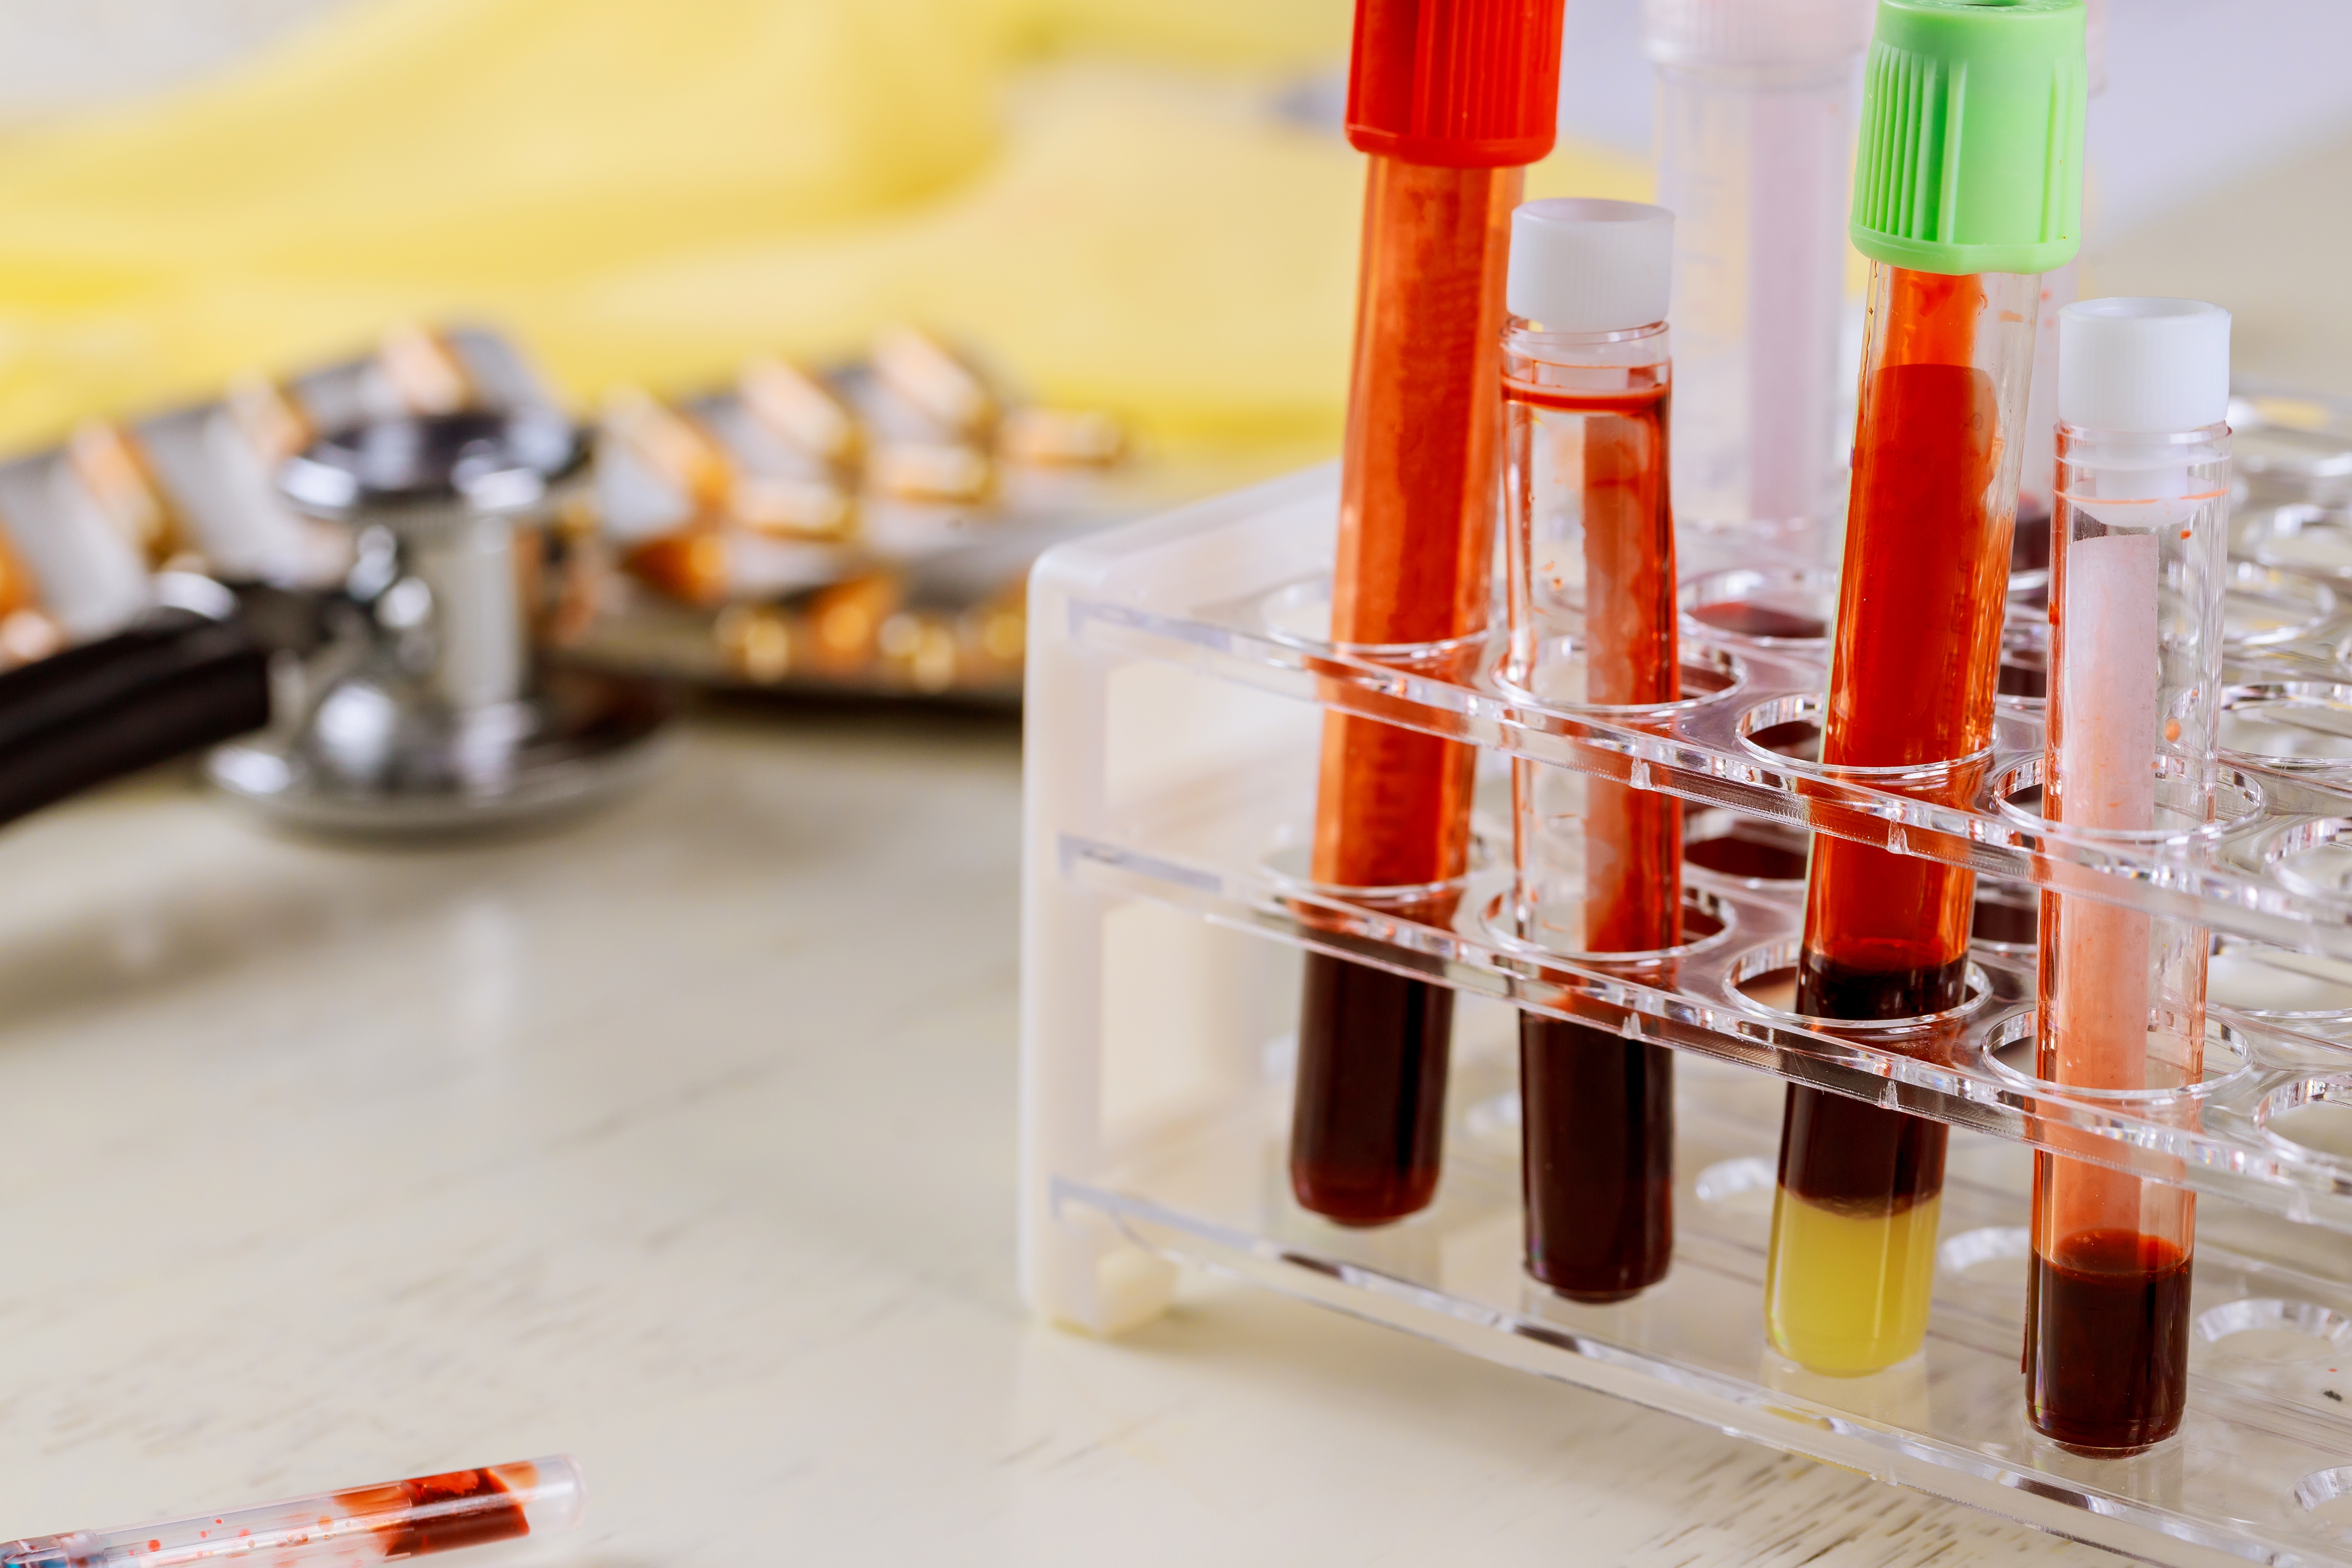 clinical blood samples